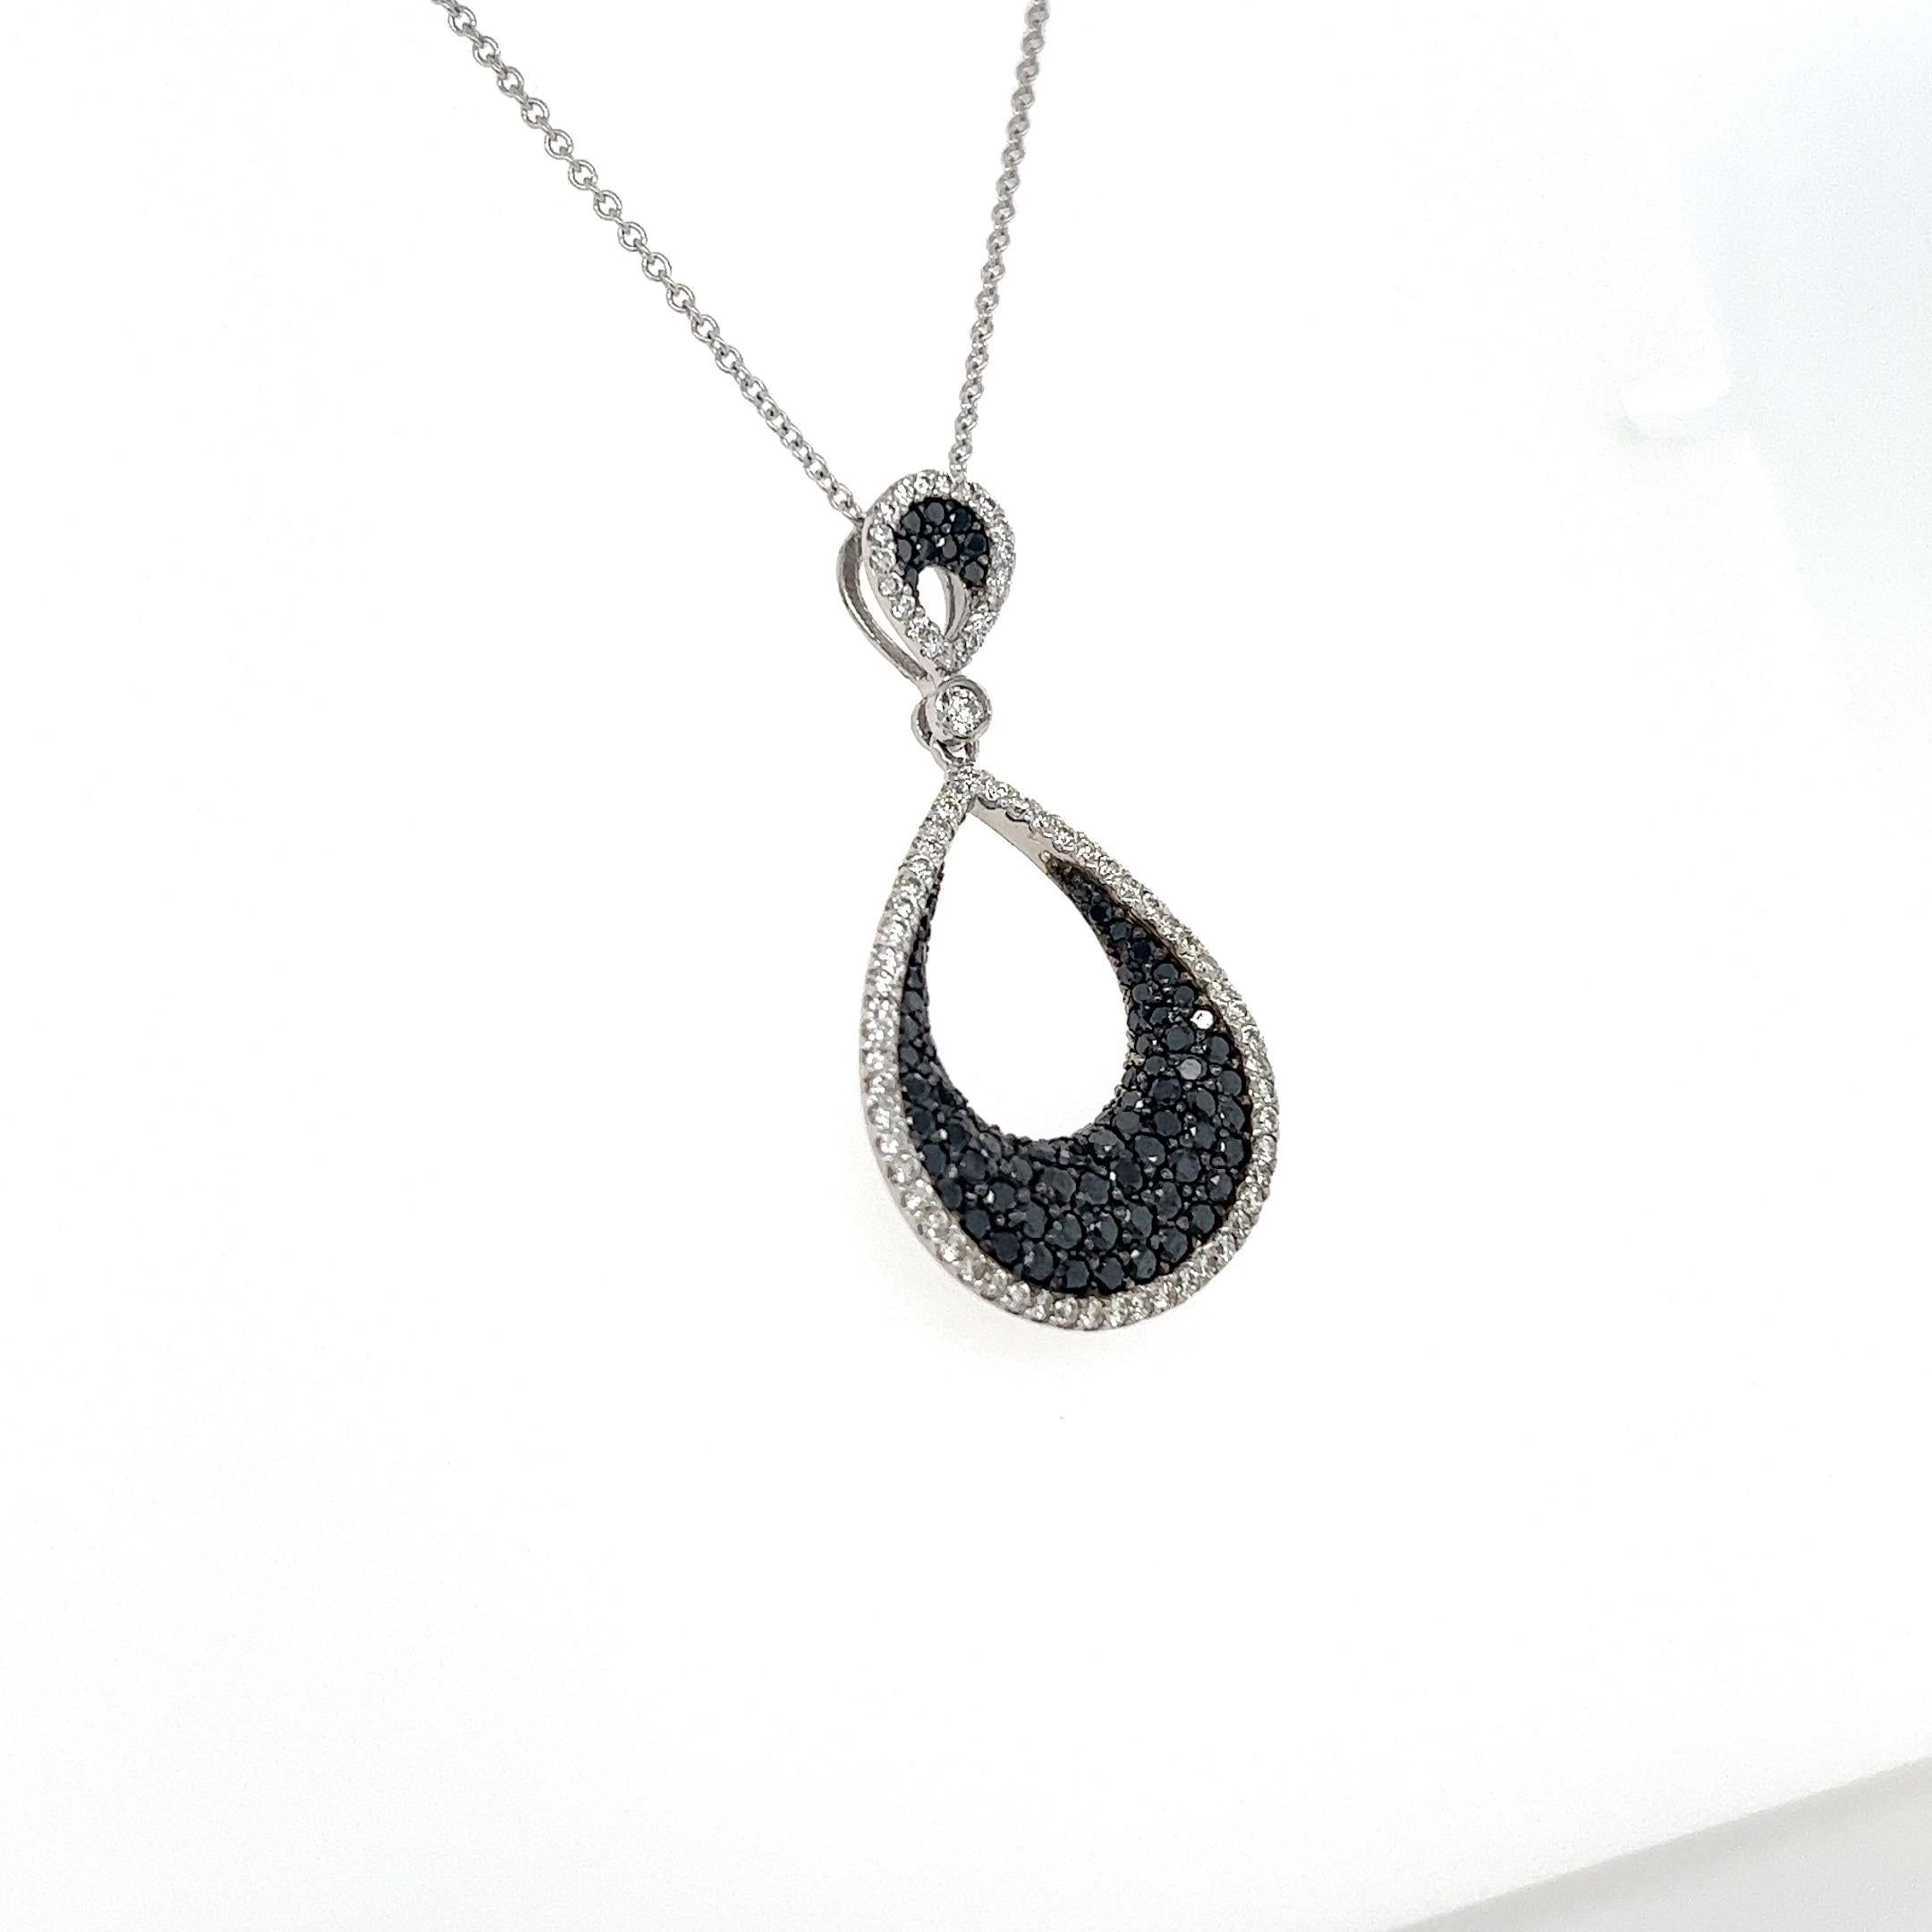 This necklace has Natural Black Diamonds that weigh 1.30 carats and Natural Round Cut Diamonds that weigh 0.75 carats. 
(Clarity: VS, Color: F) The total carat weight of the necklace is 2.05 carats.

The necklace is made in 14 Karat White Gold and